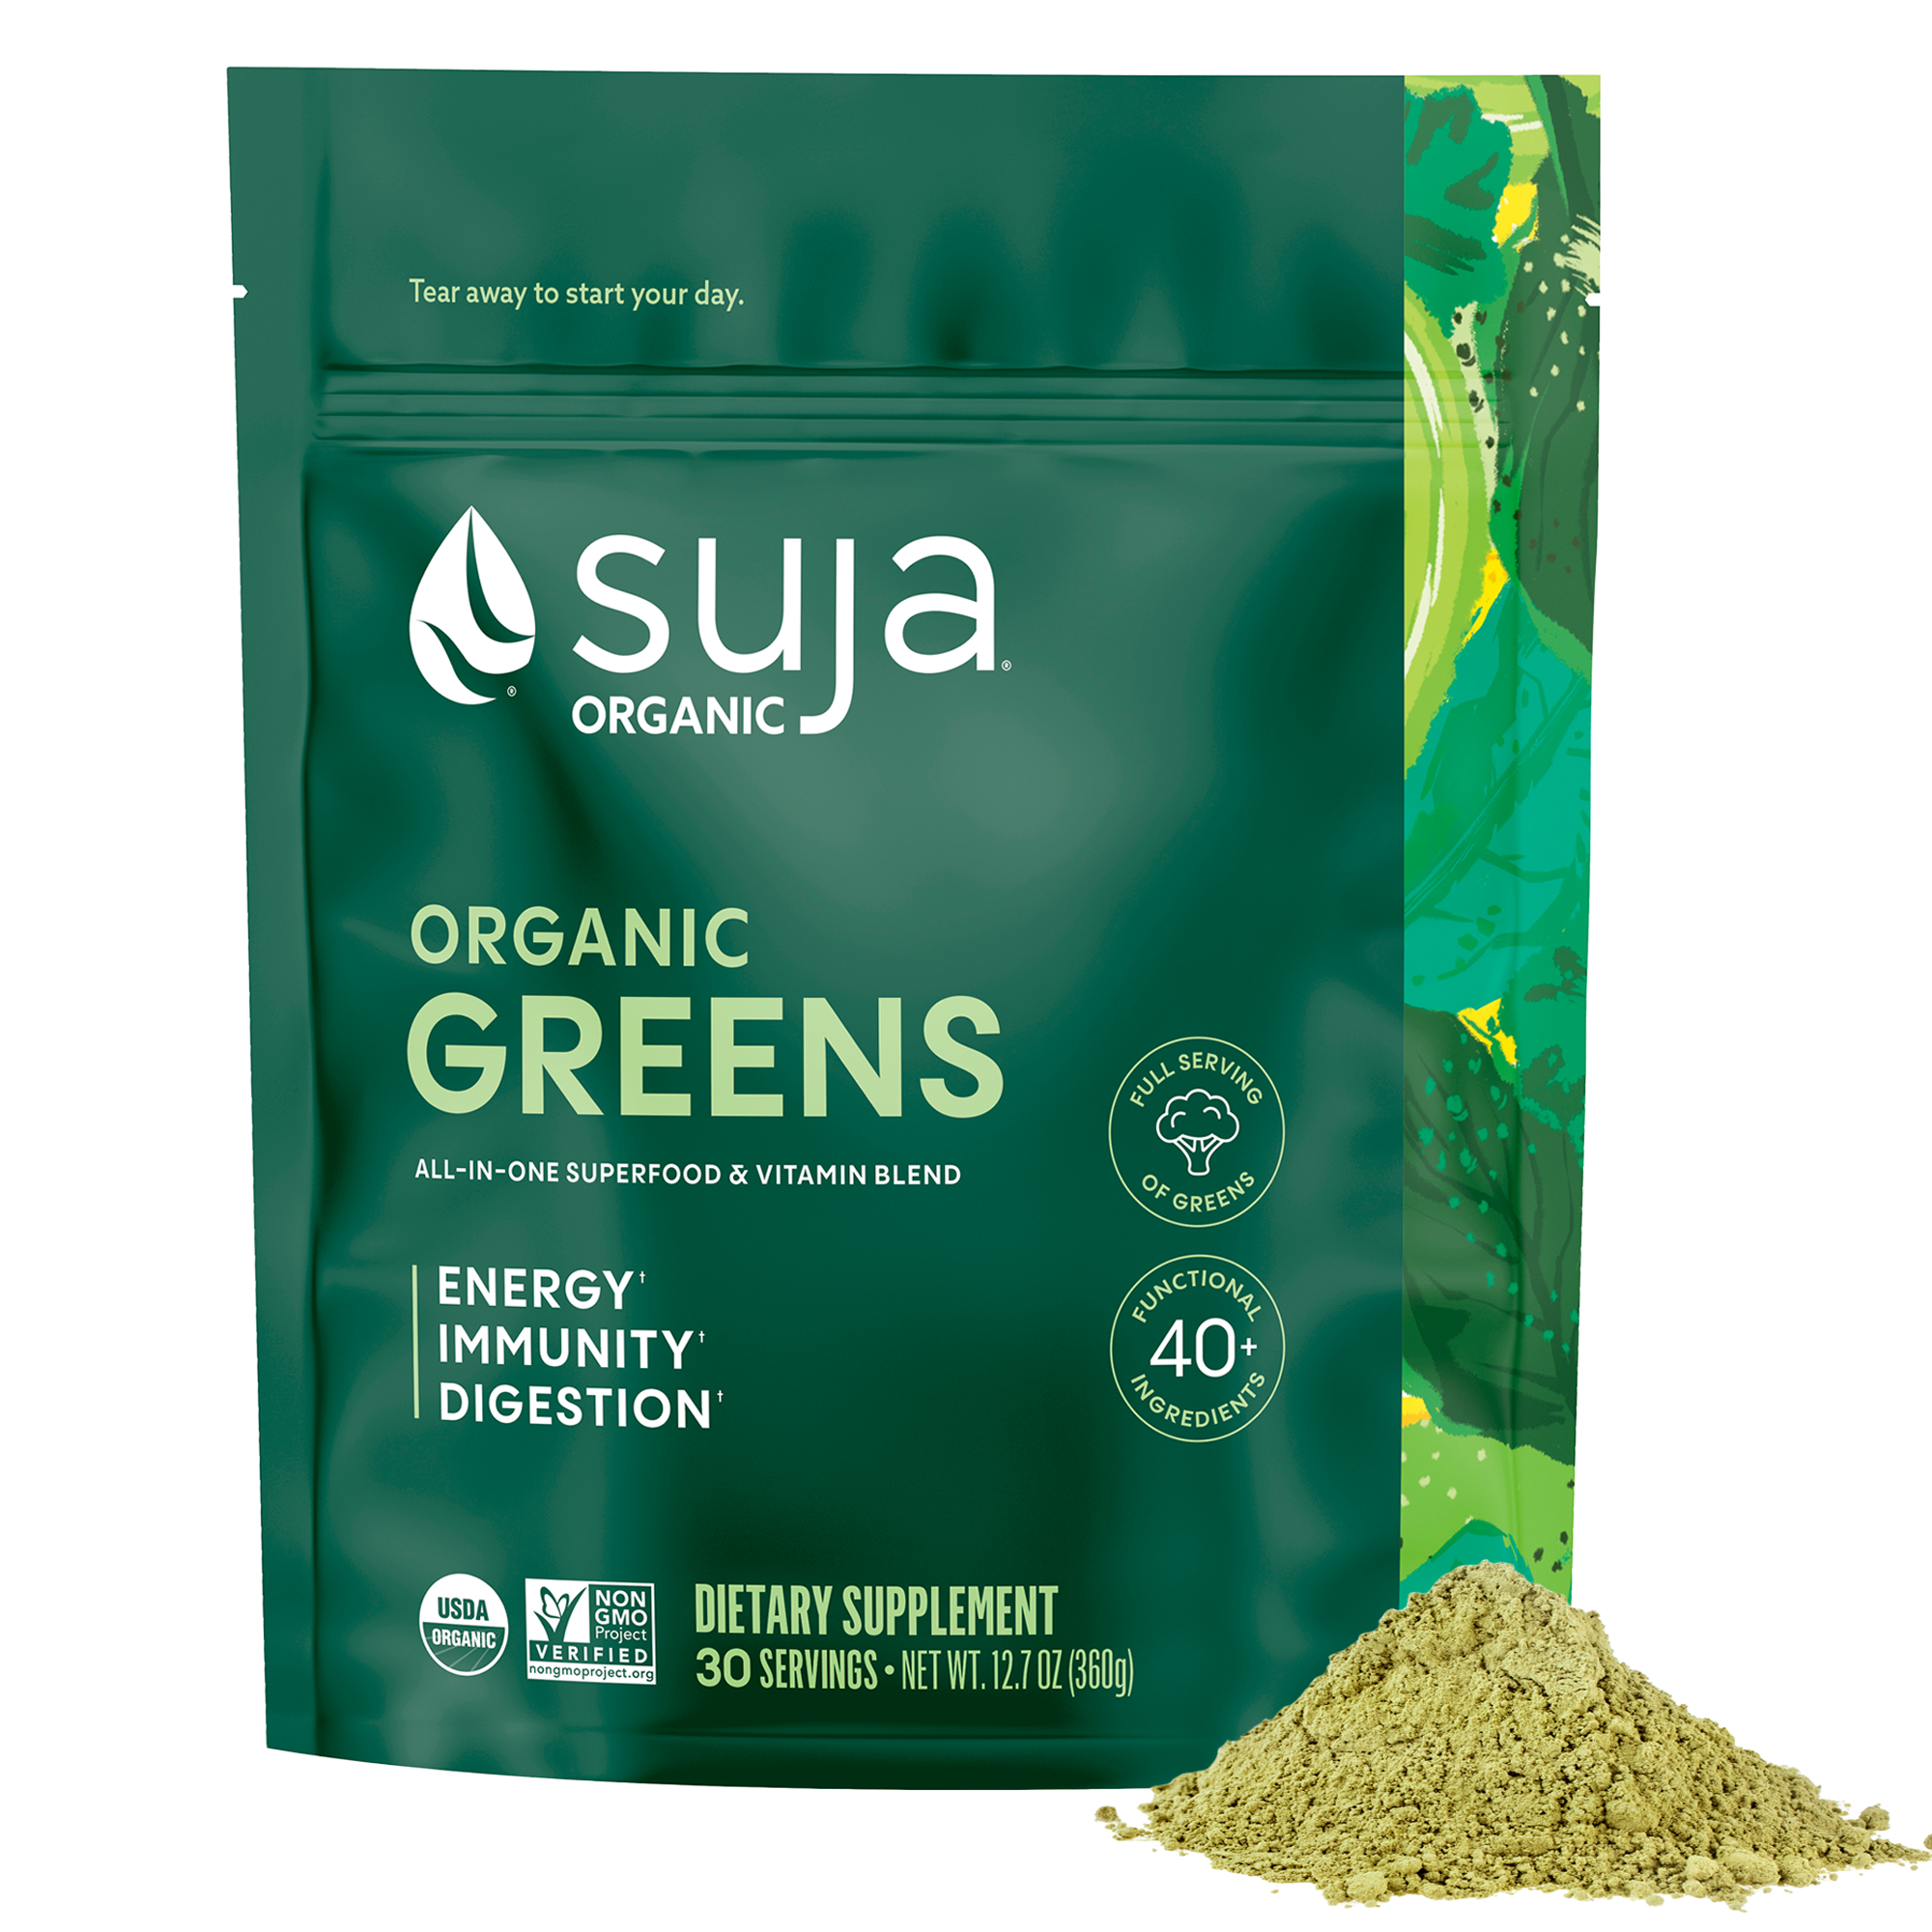 Your Super Organic Super Green Smoothie Mix – Superfood Powder for Natural  Immune Support, Made with Wheatgrass, Barley Grass, Moringa, Spirulina